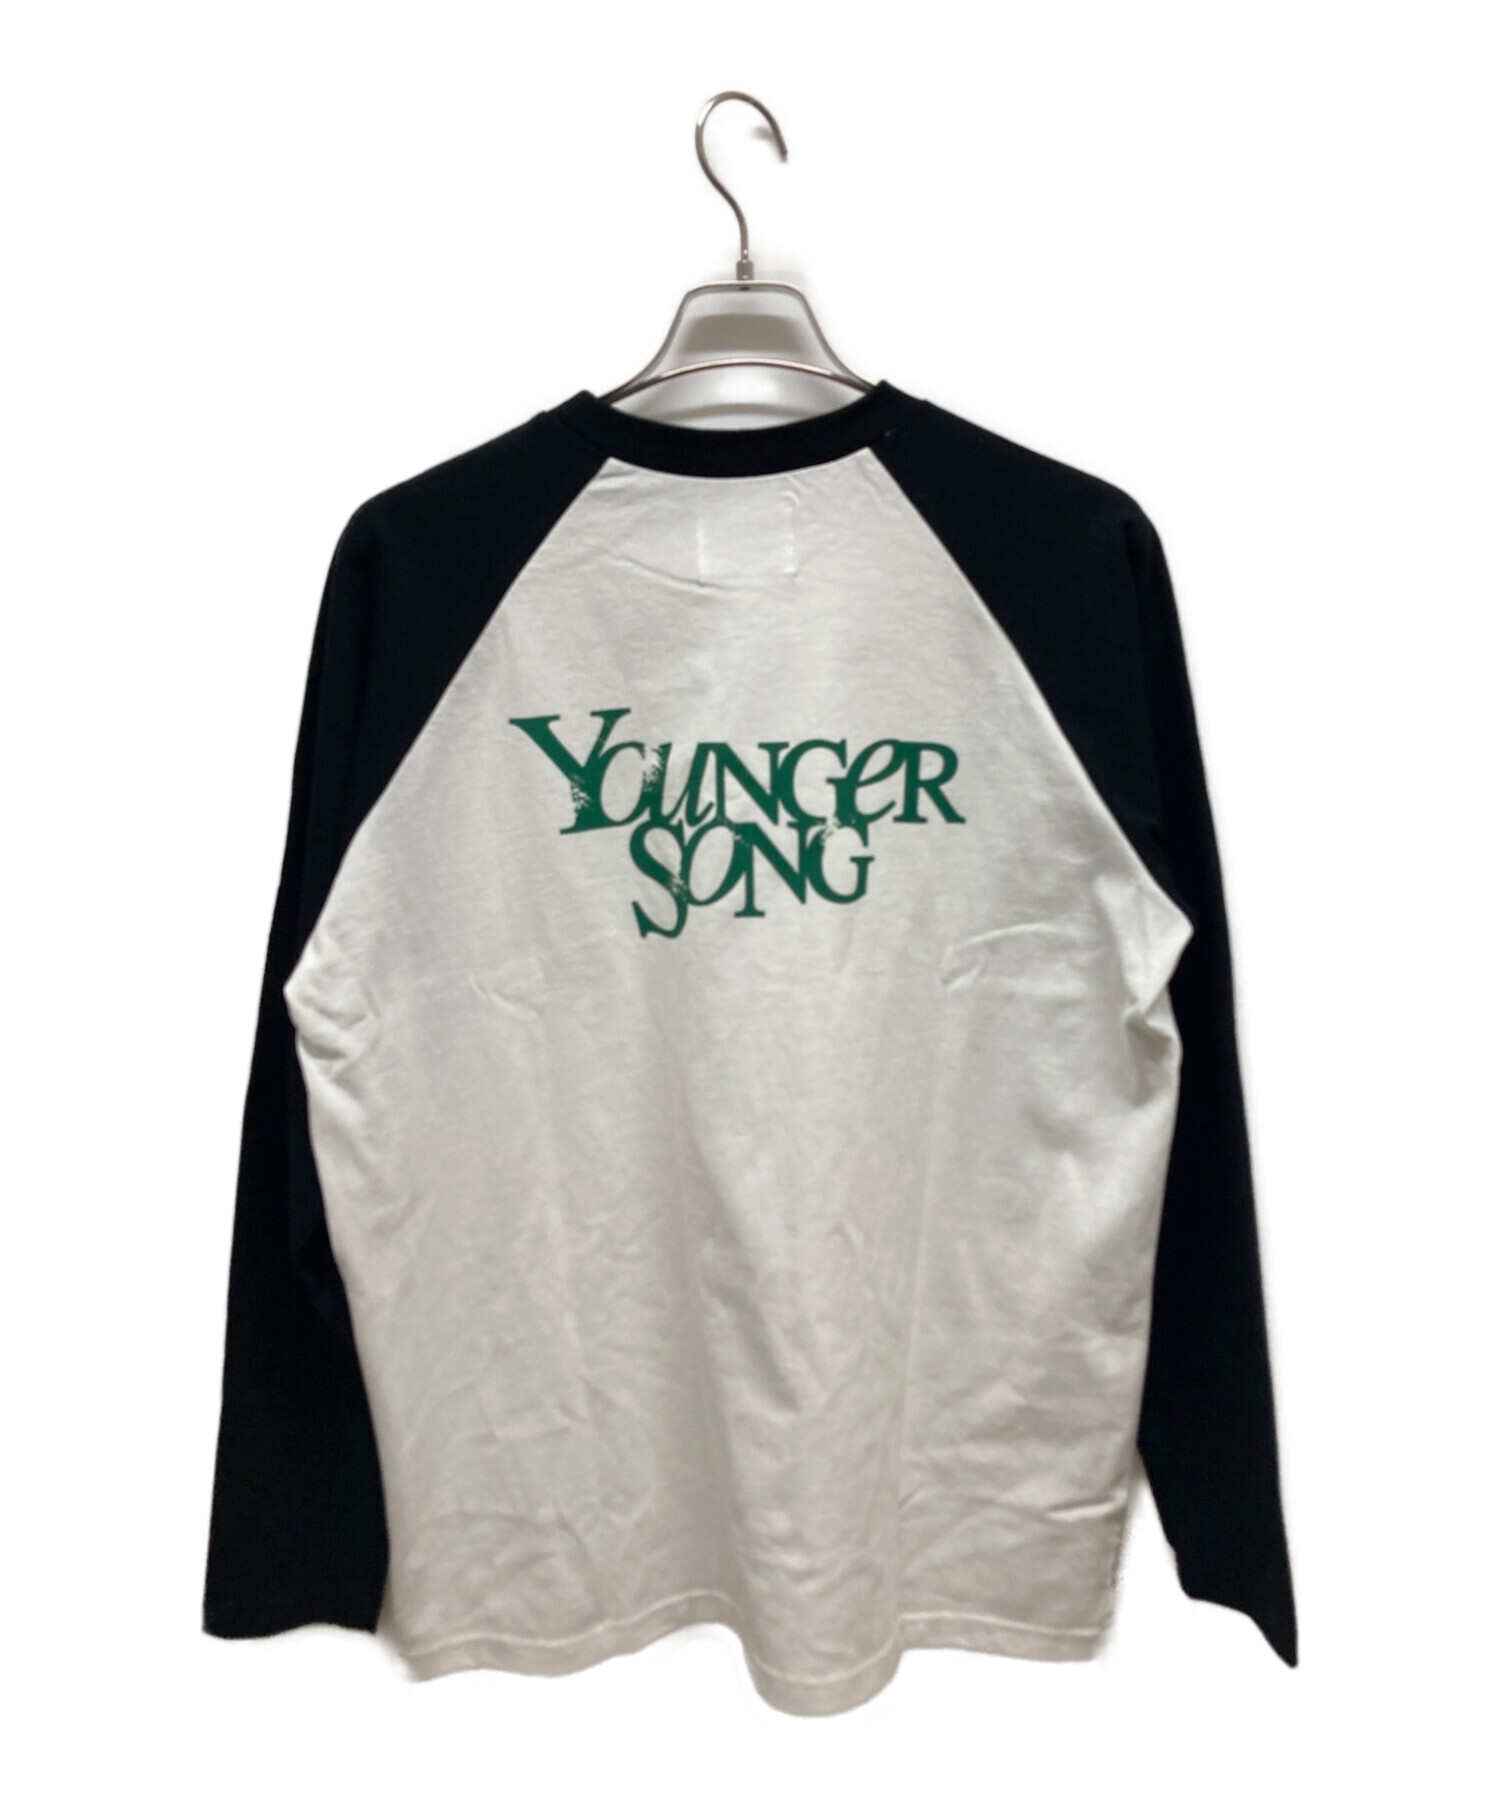 younger song ラグランＴ ヤンガーソング - Tシャツ/カットソー(半袖